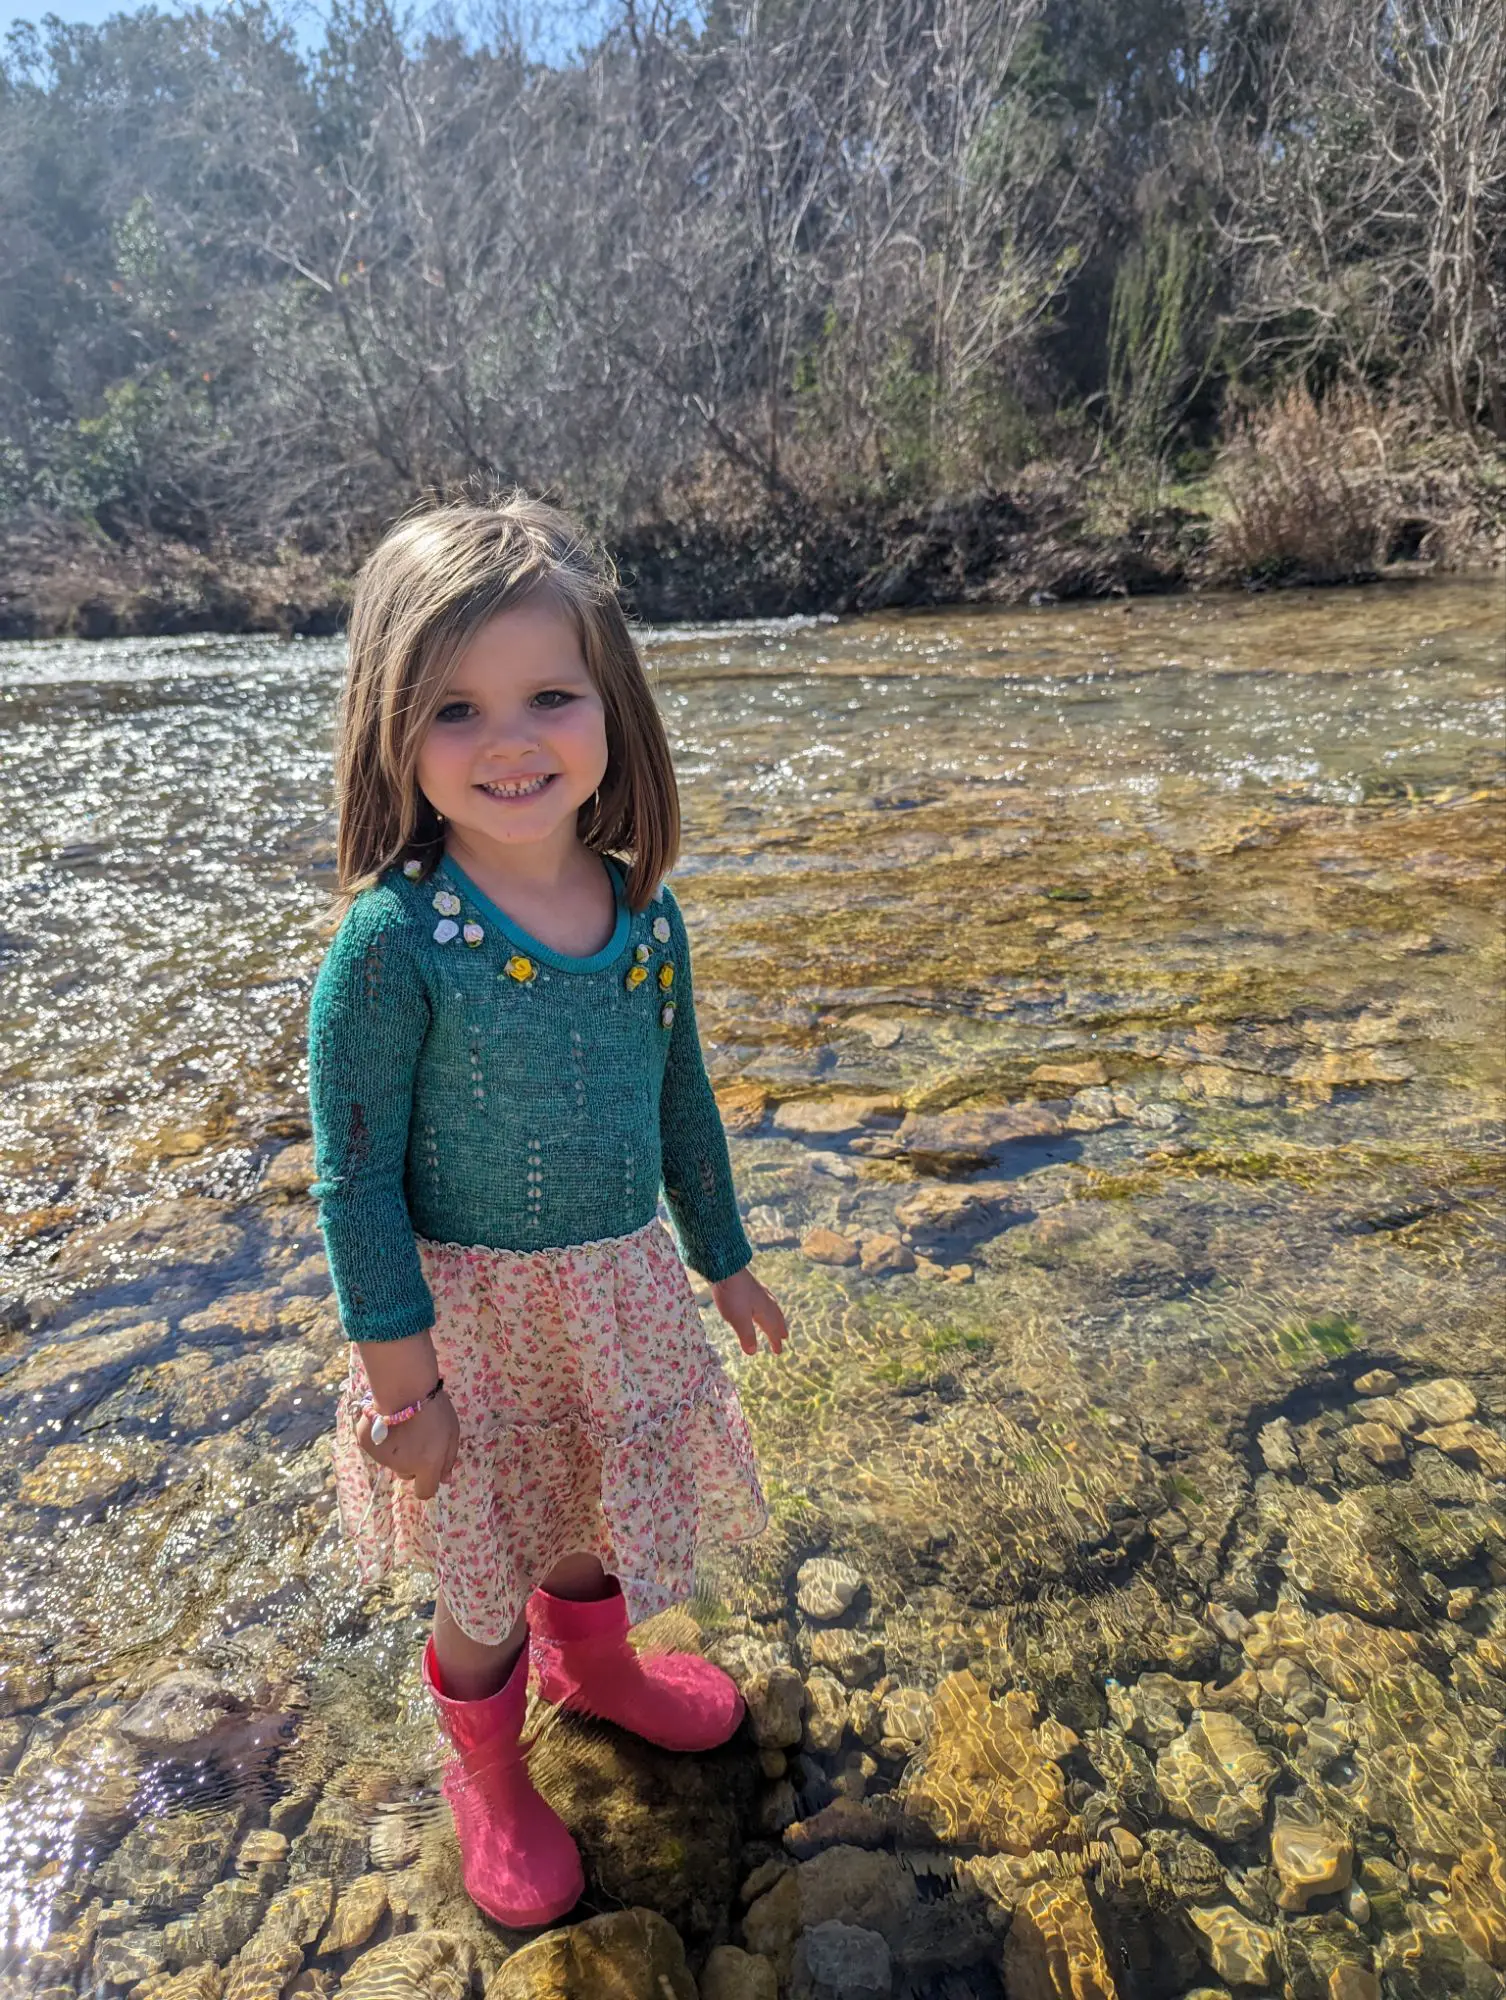 Vivienne standing in the river wearing rainboots.